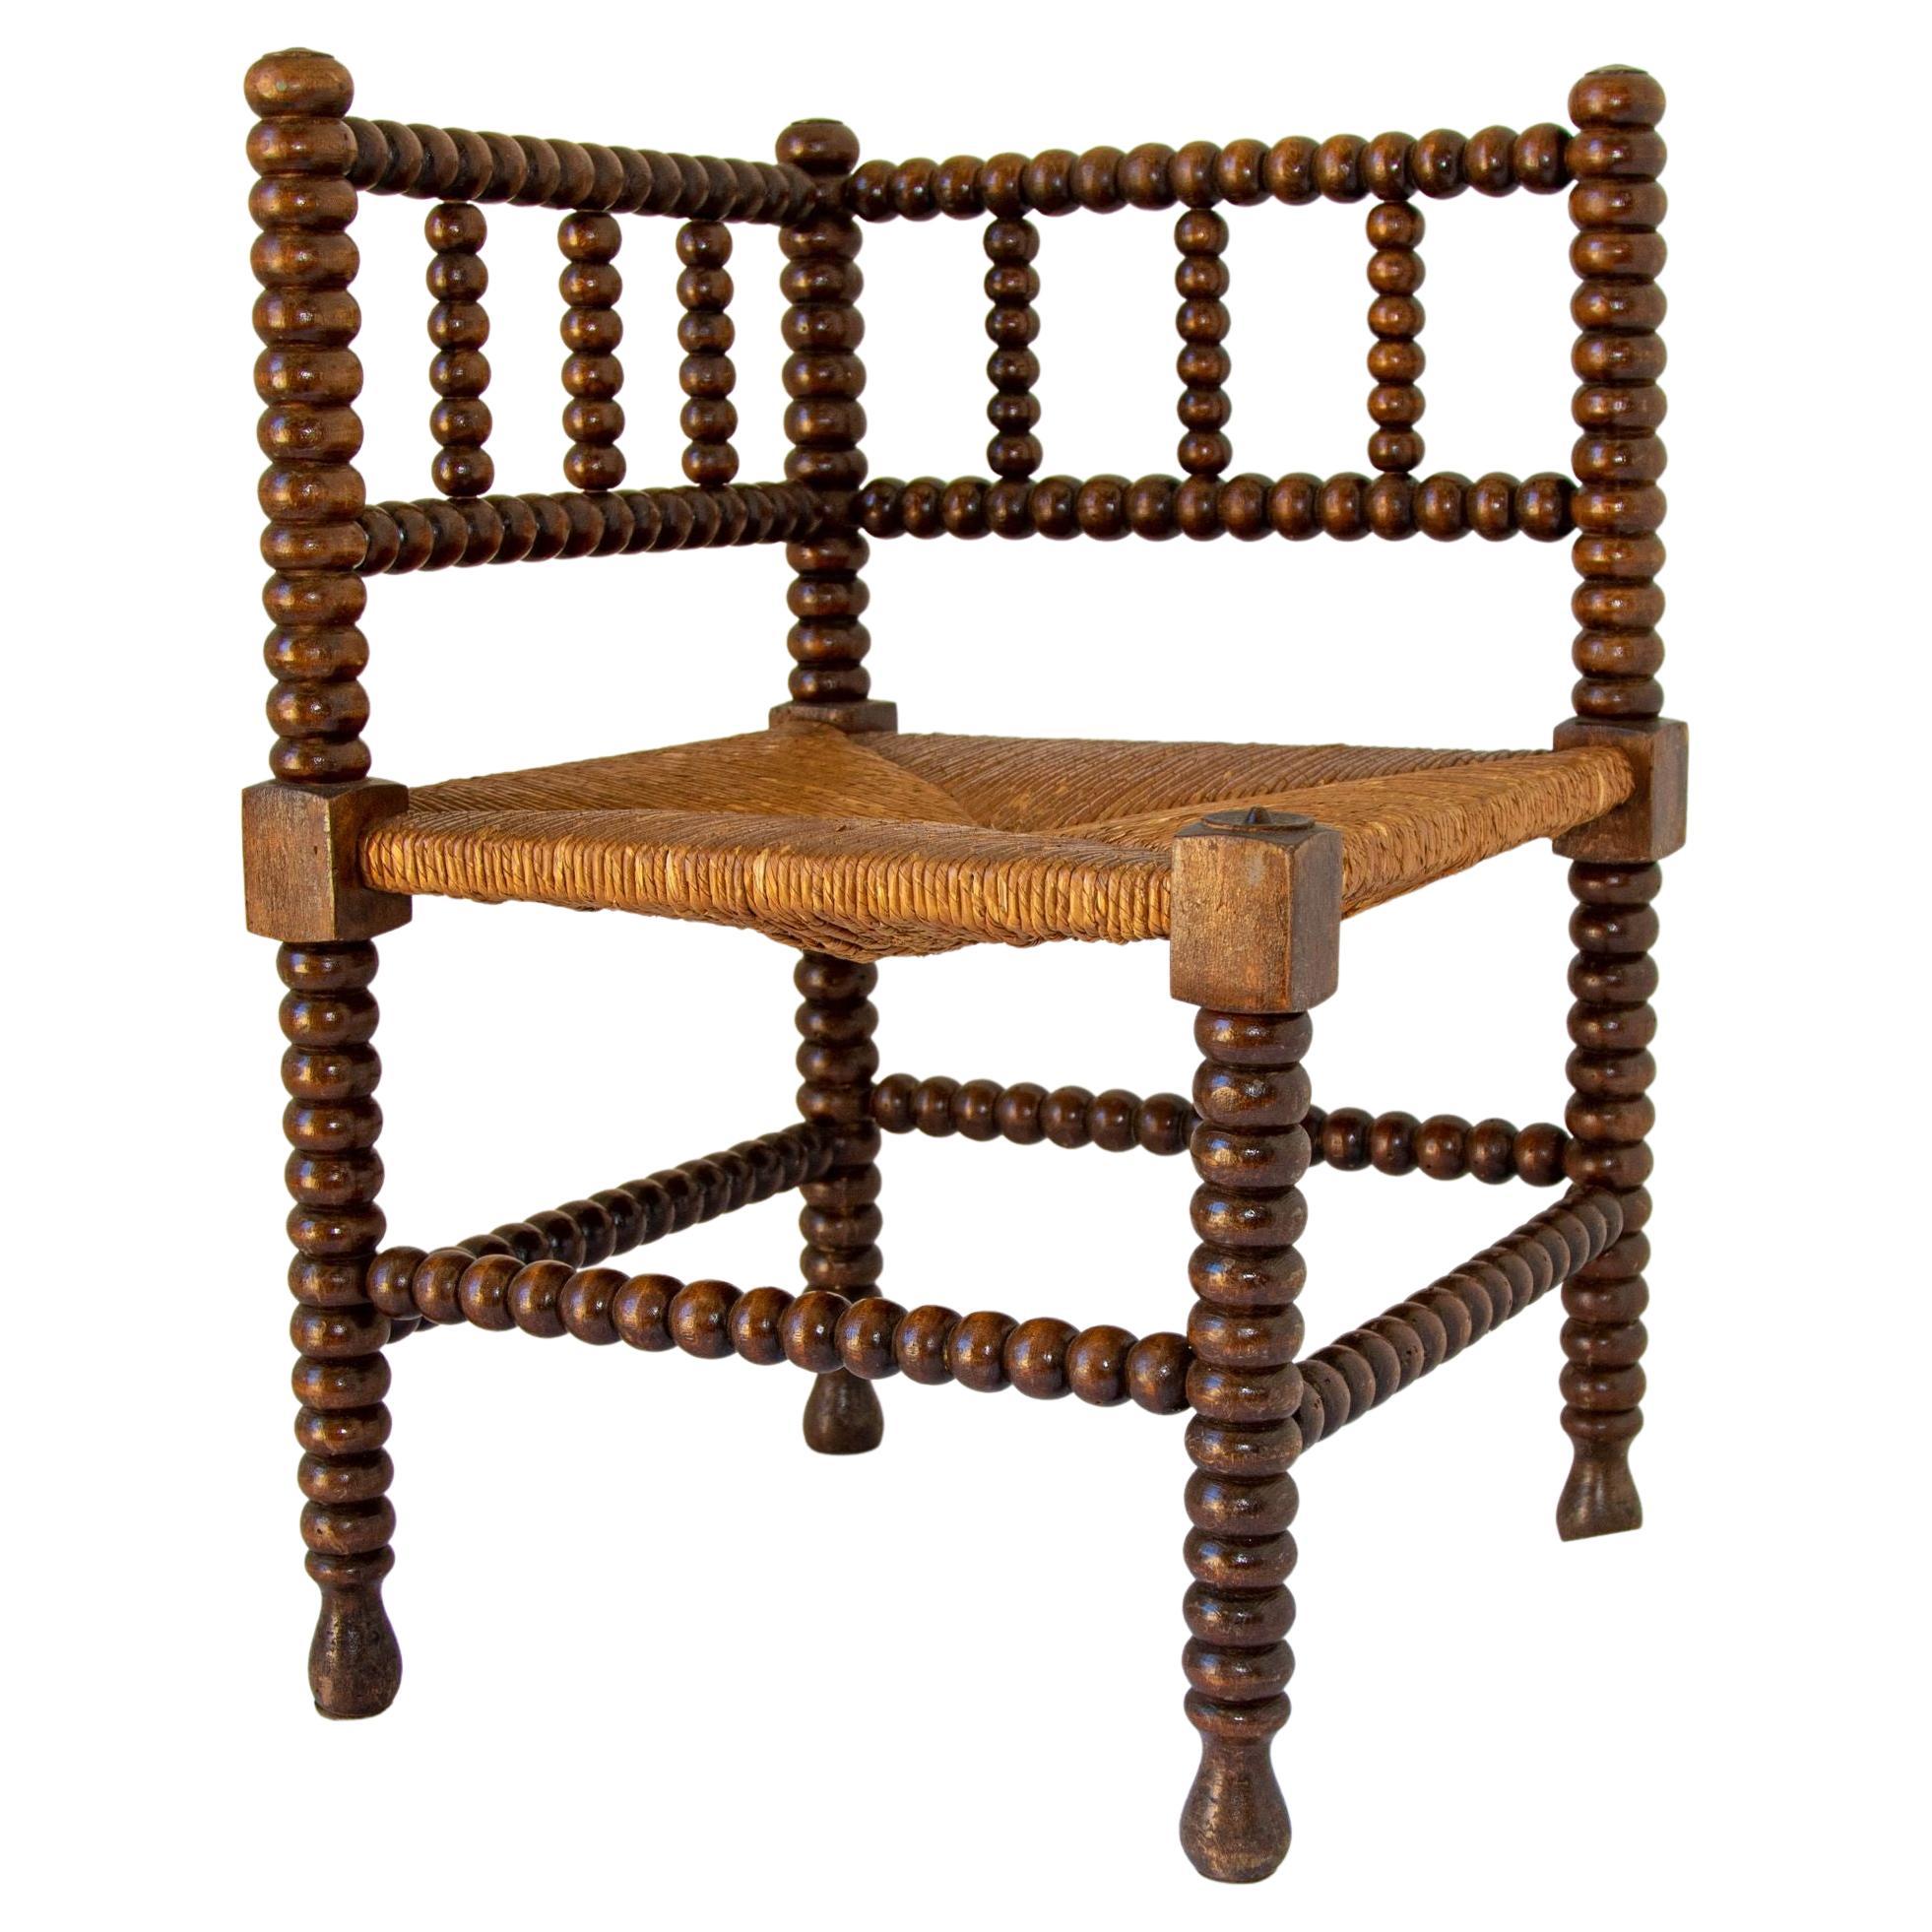 Antique French Provincial Rush Corner Chair Carved Oak 19th C.